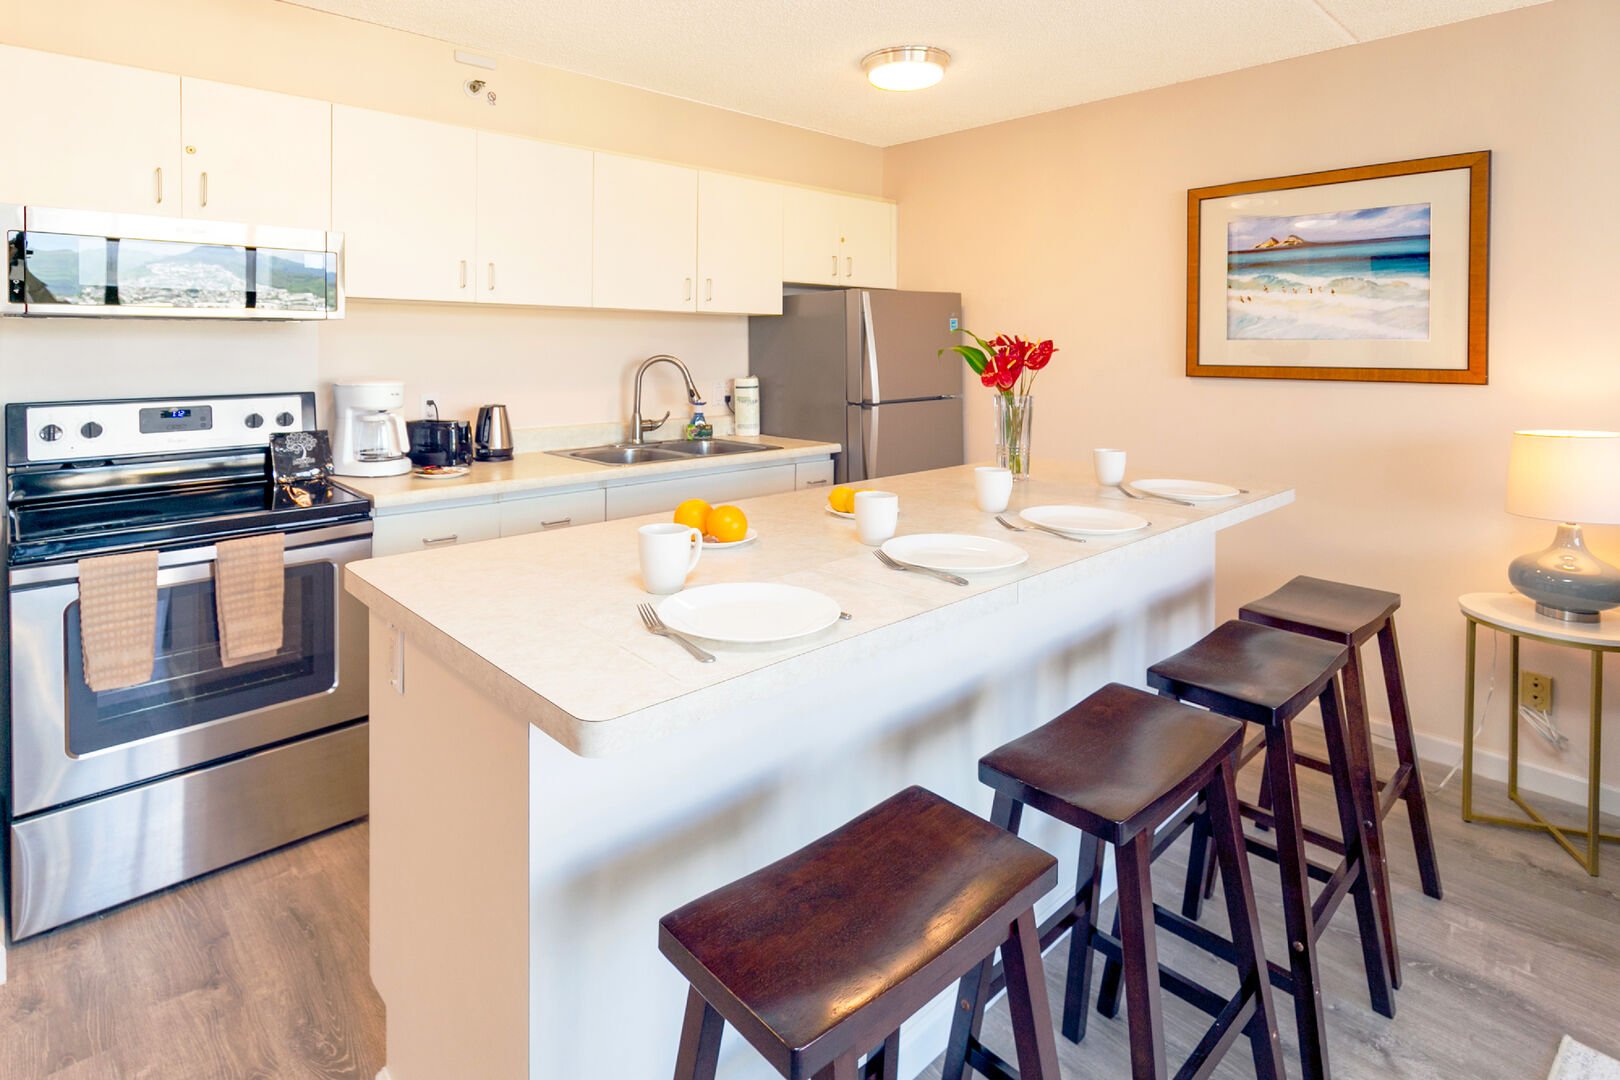 Fully equipped kitchen and counter-top with 4 bar-stools